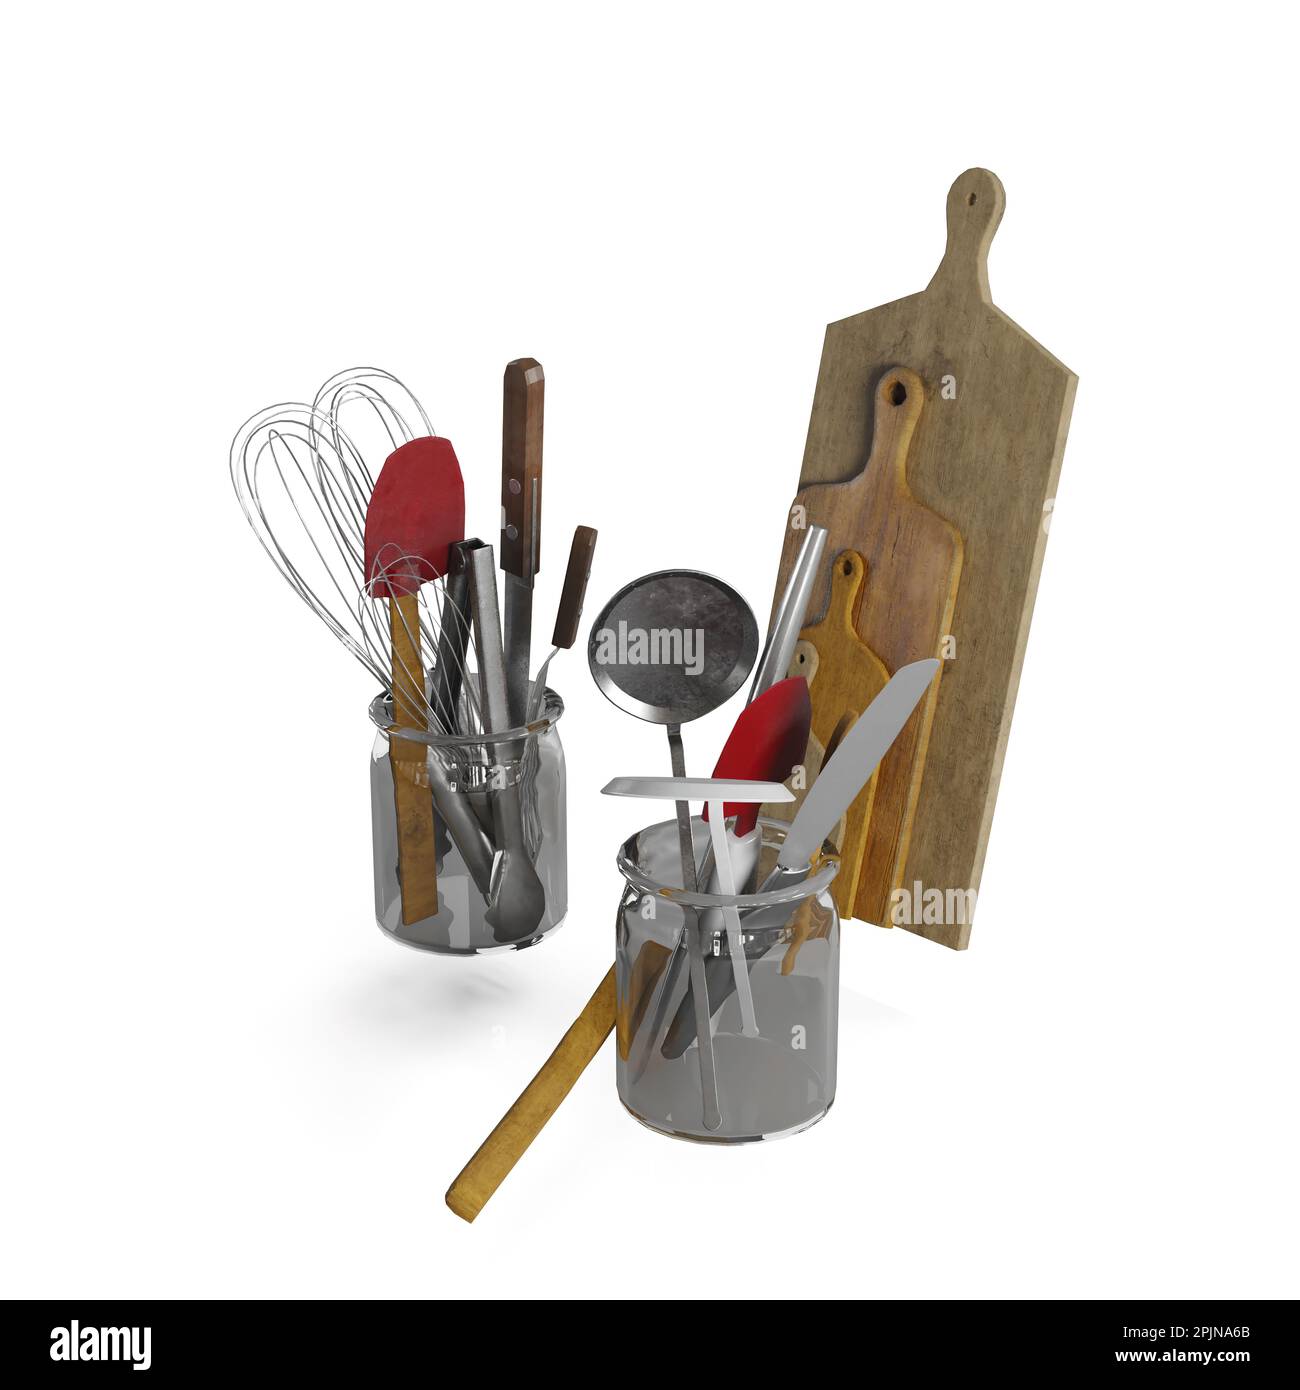 A 3d rendering of tidy kitchen utensil holder made of metal, featuring a range of cooking tools Stock Photo